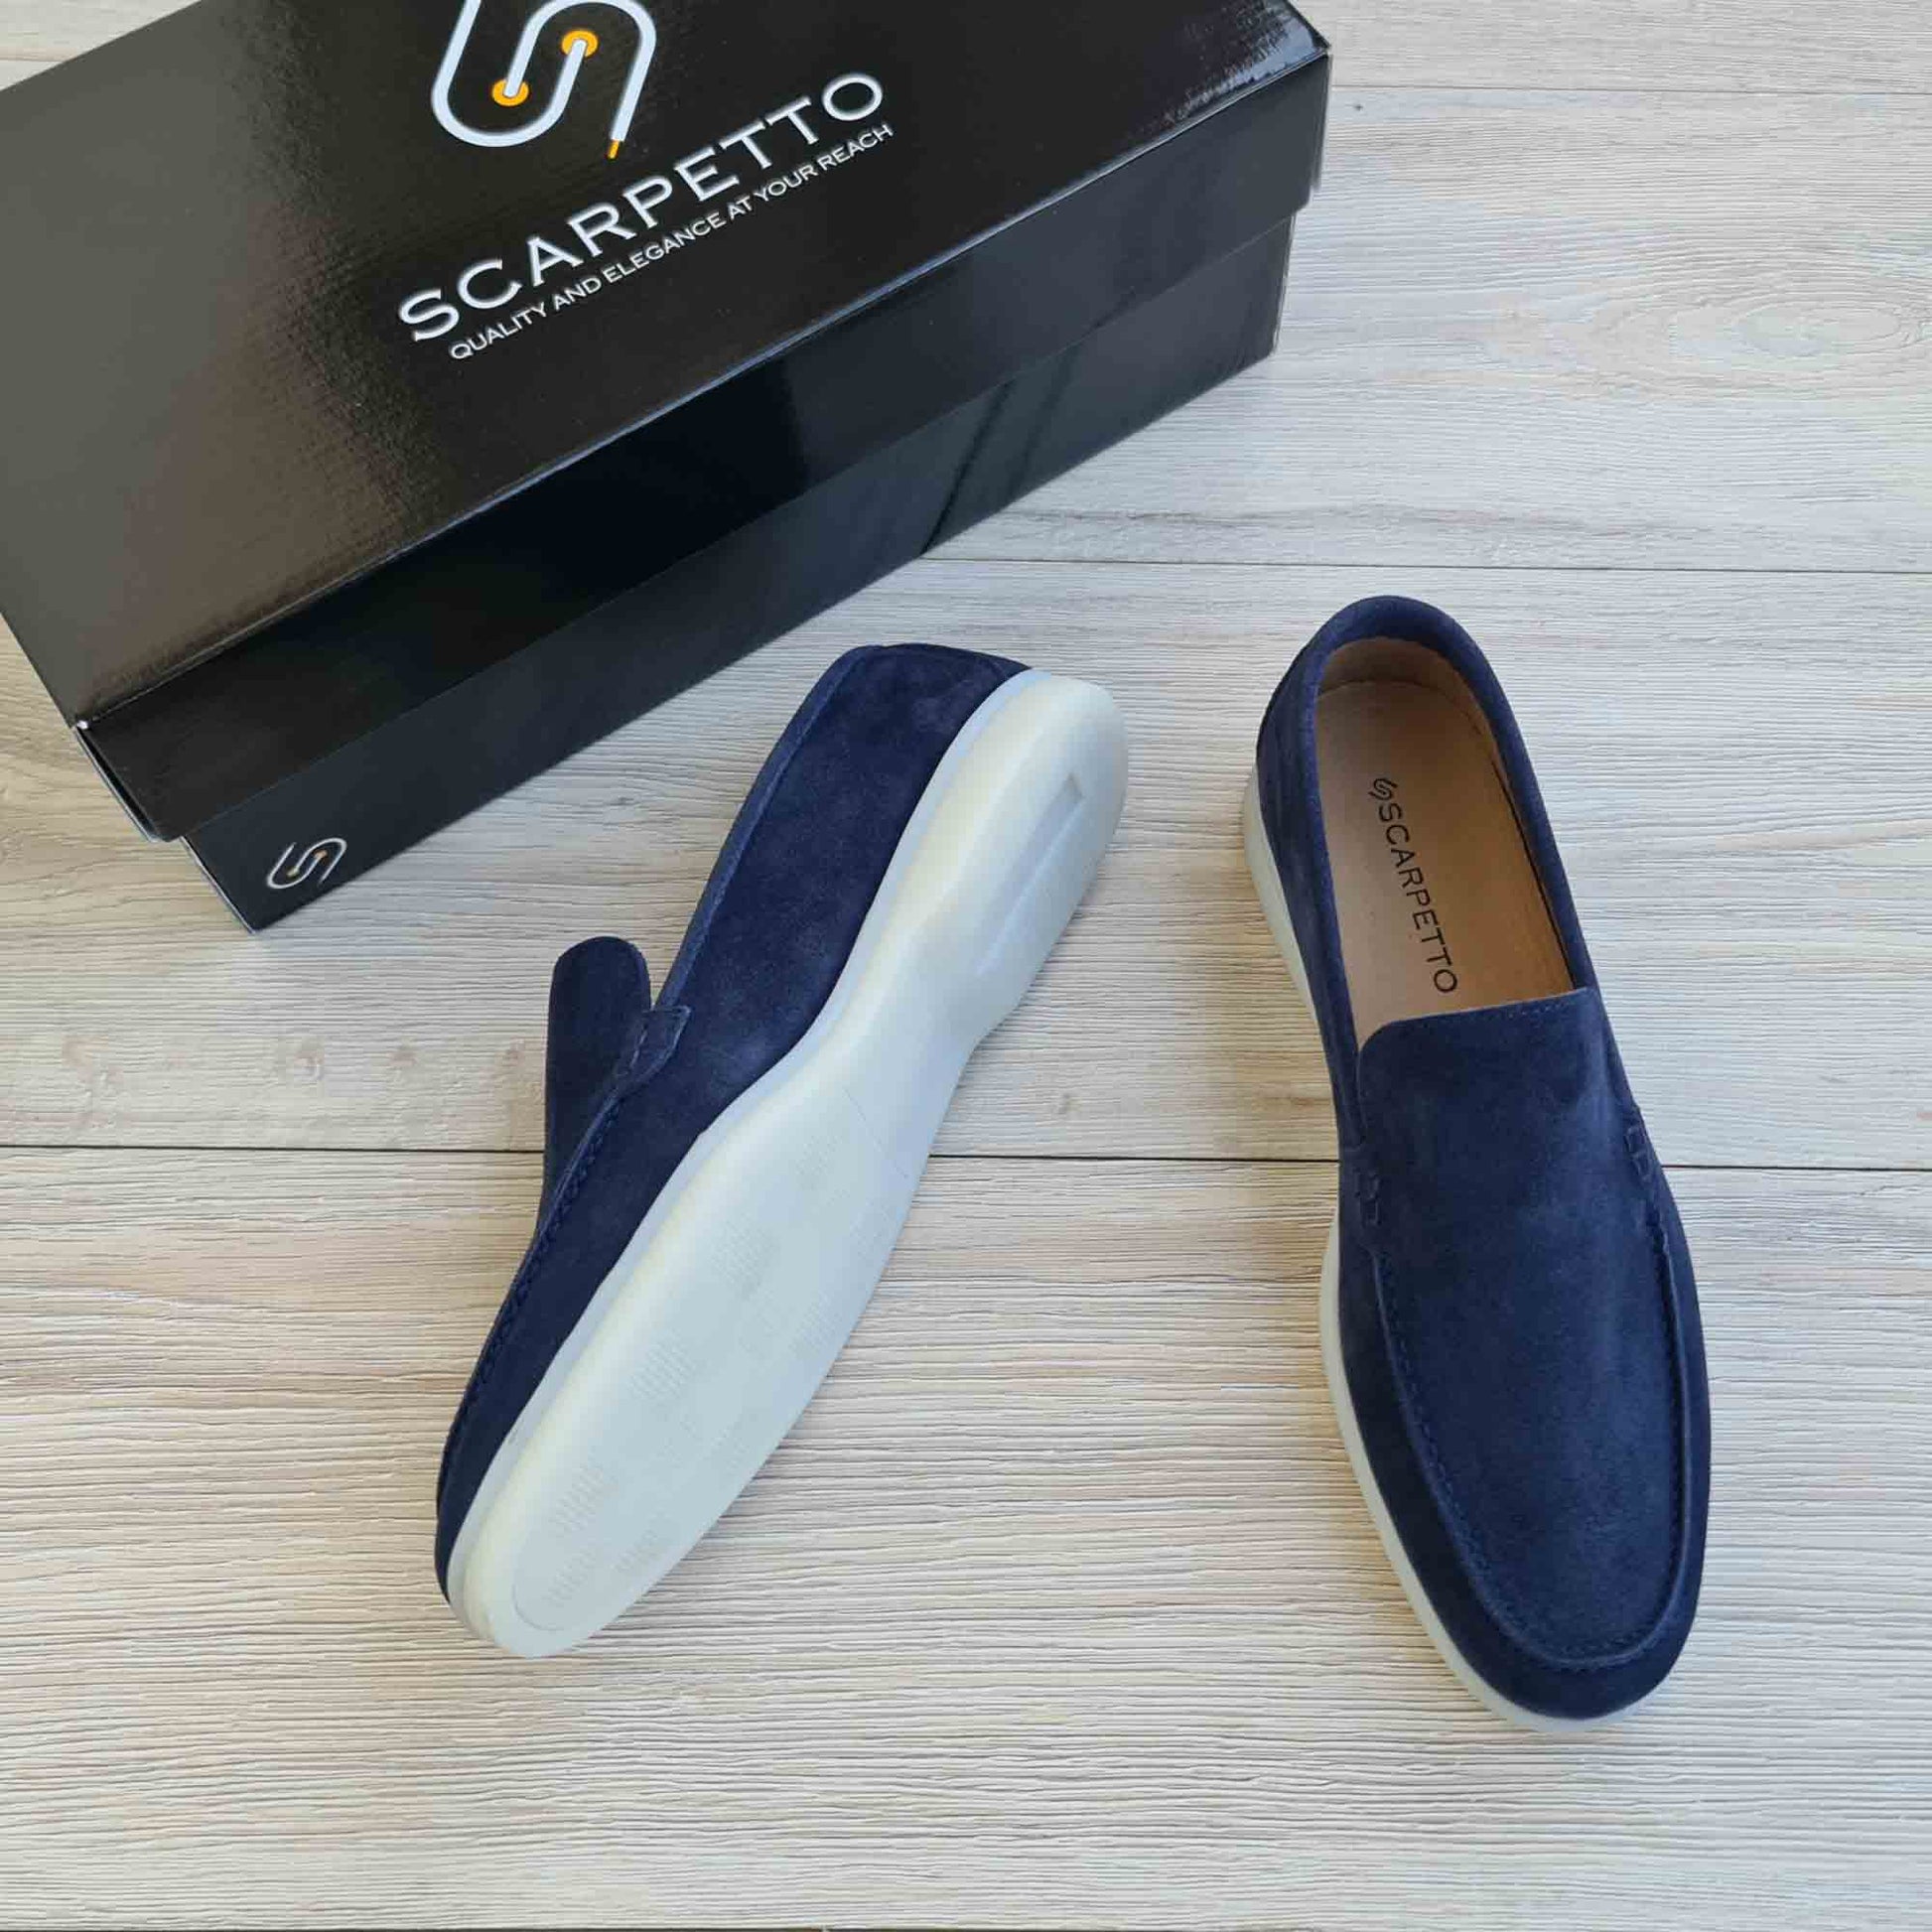 Men's Suede Leather Loafers - White Sole